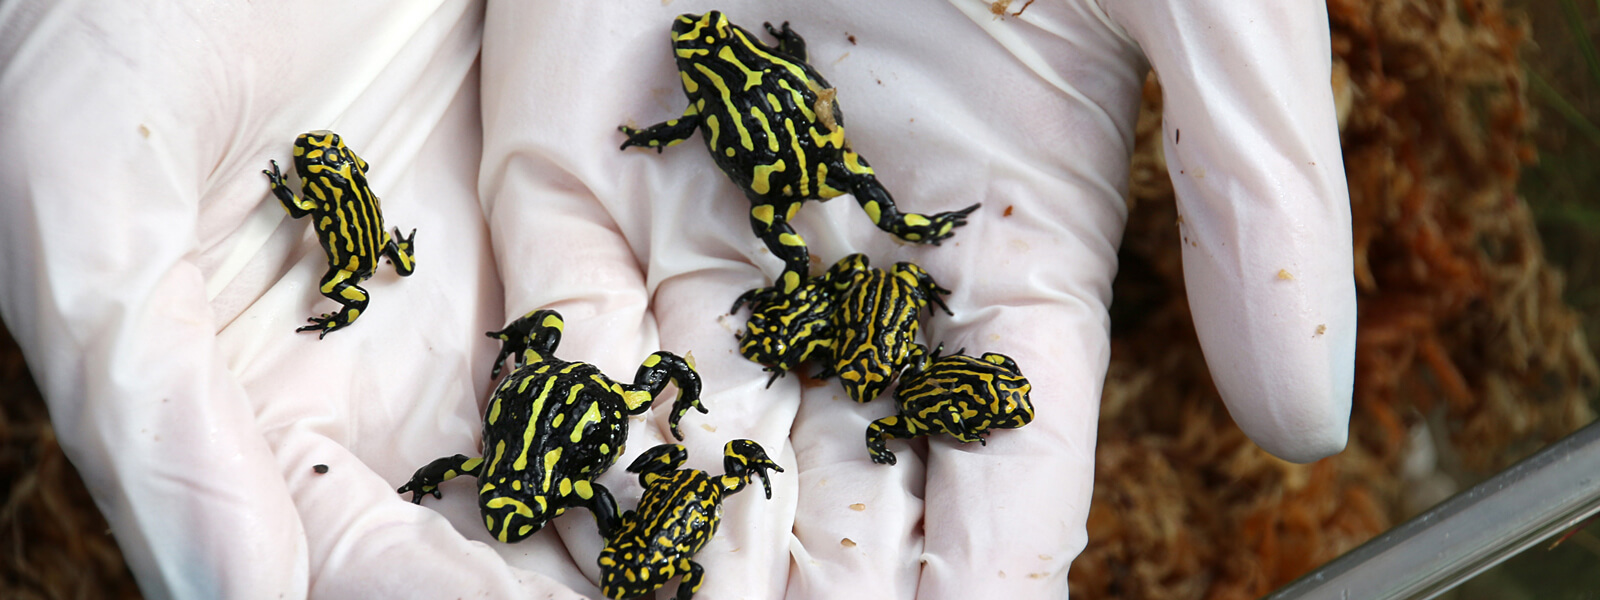 Six New Miniature Frog Species Discovered in Mexico